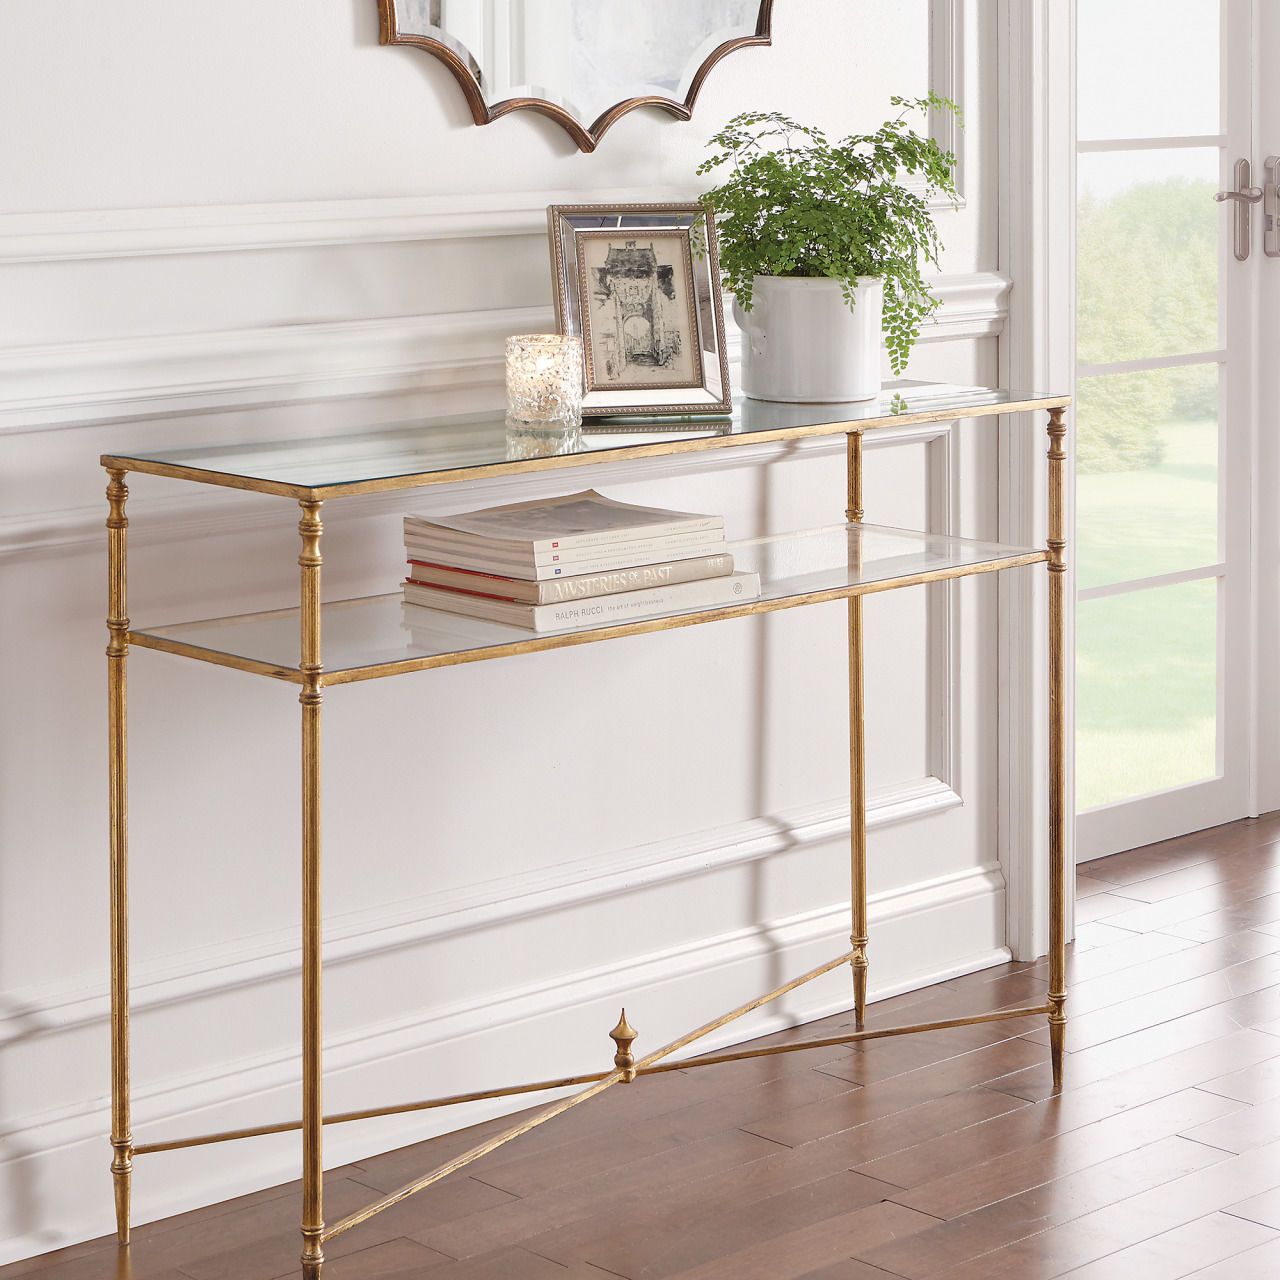 Horchow Sofa Console Table Hollywood Regency Antique Gold Inside Glass And Gold Oval Console Tables (View 8 of 20)